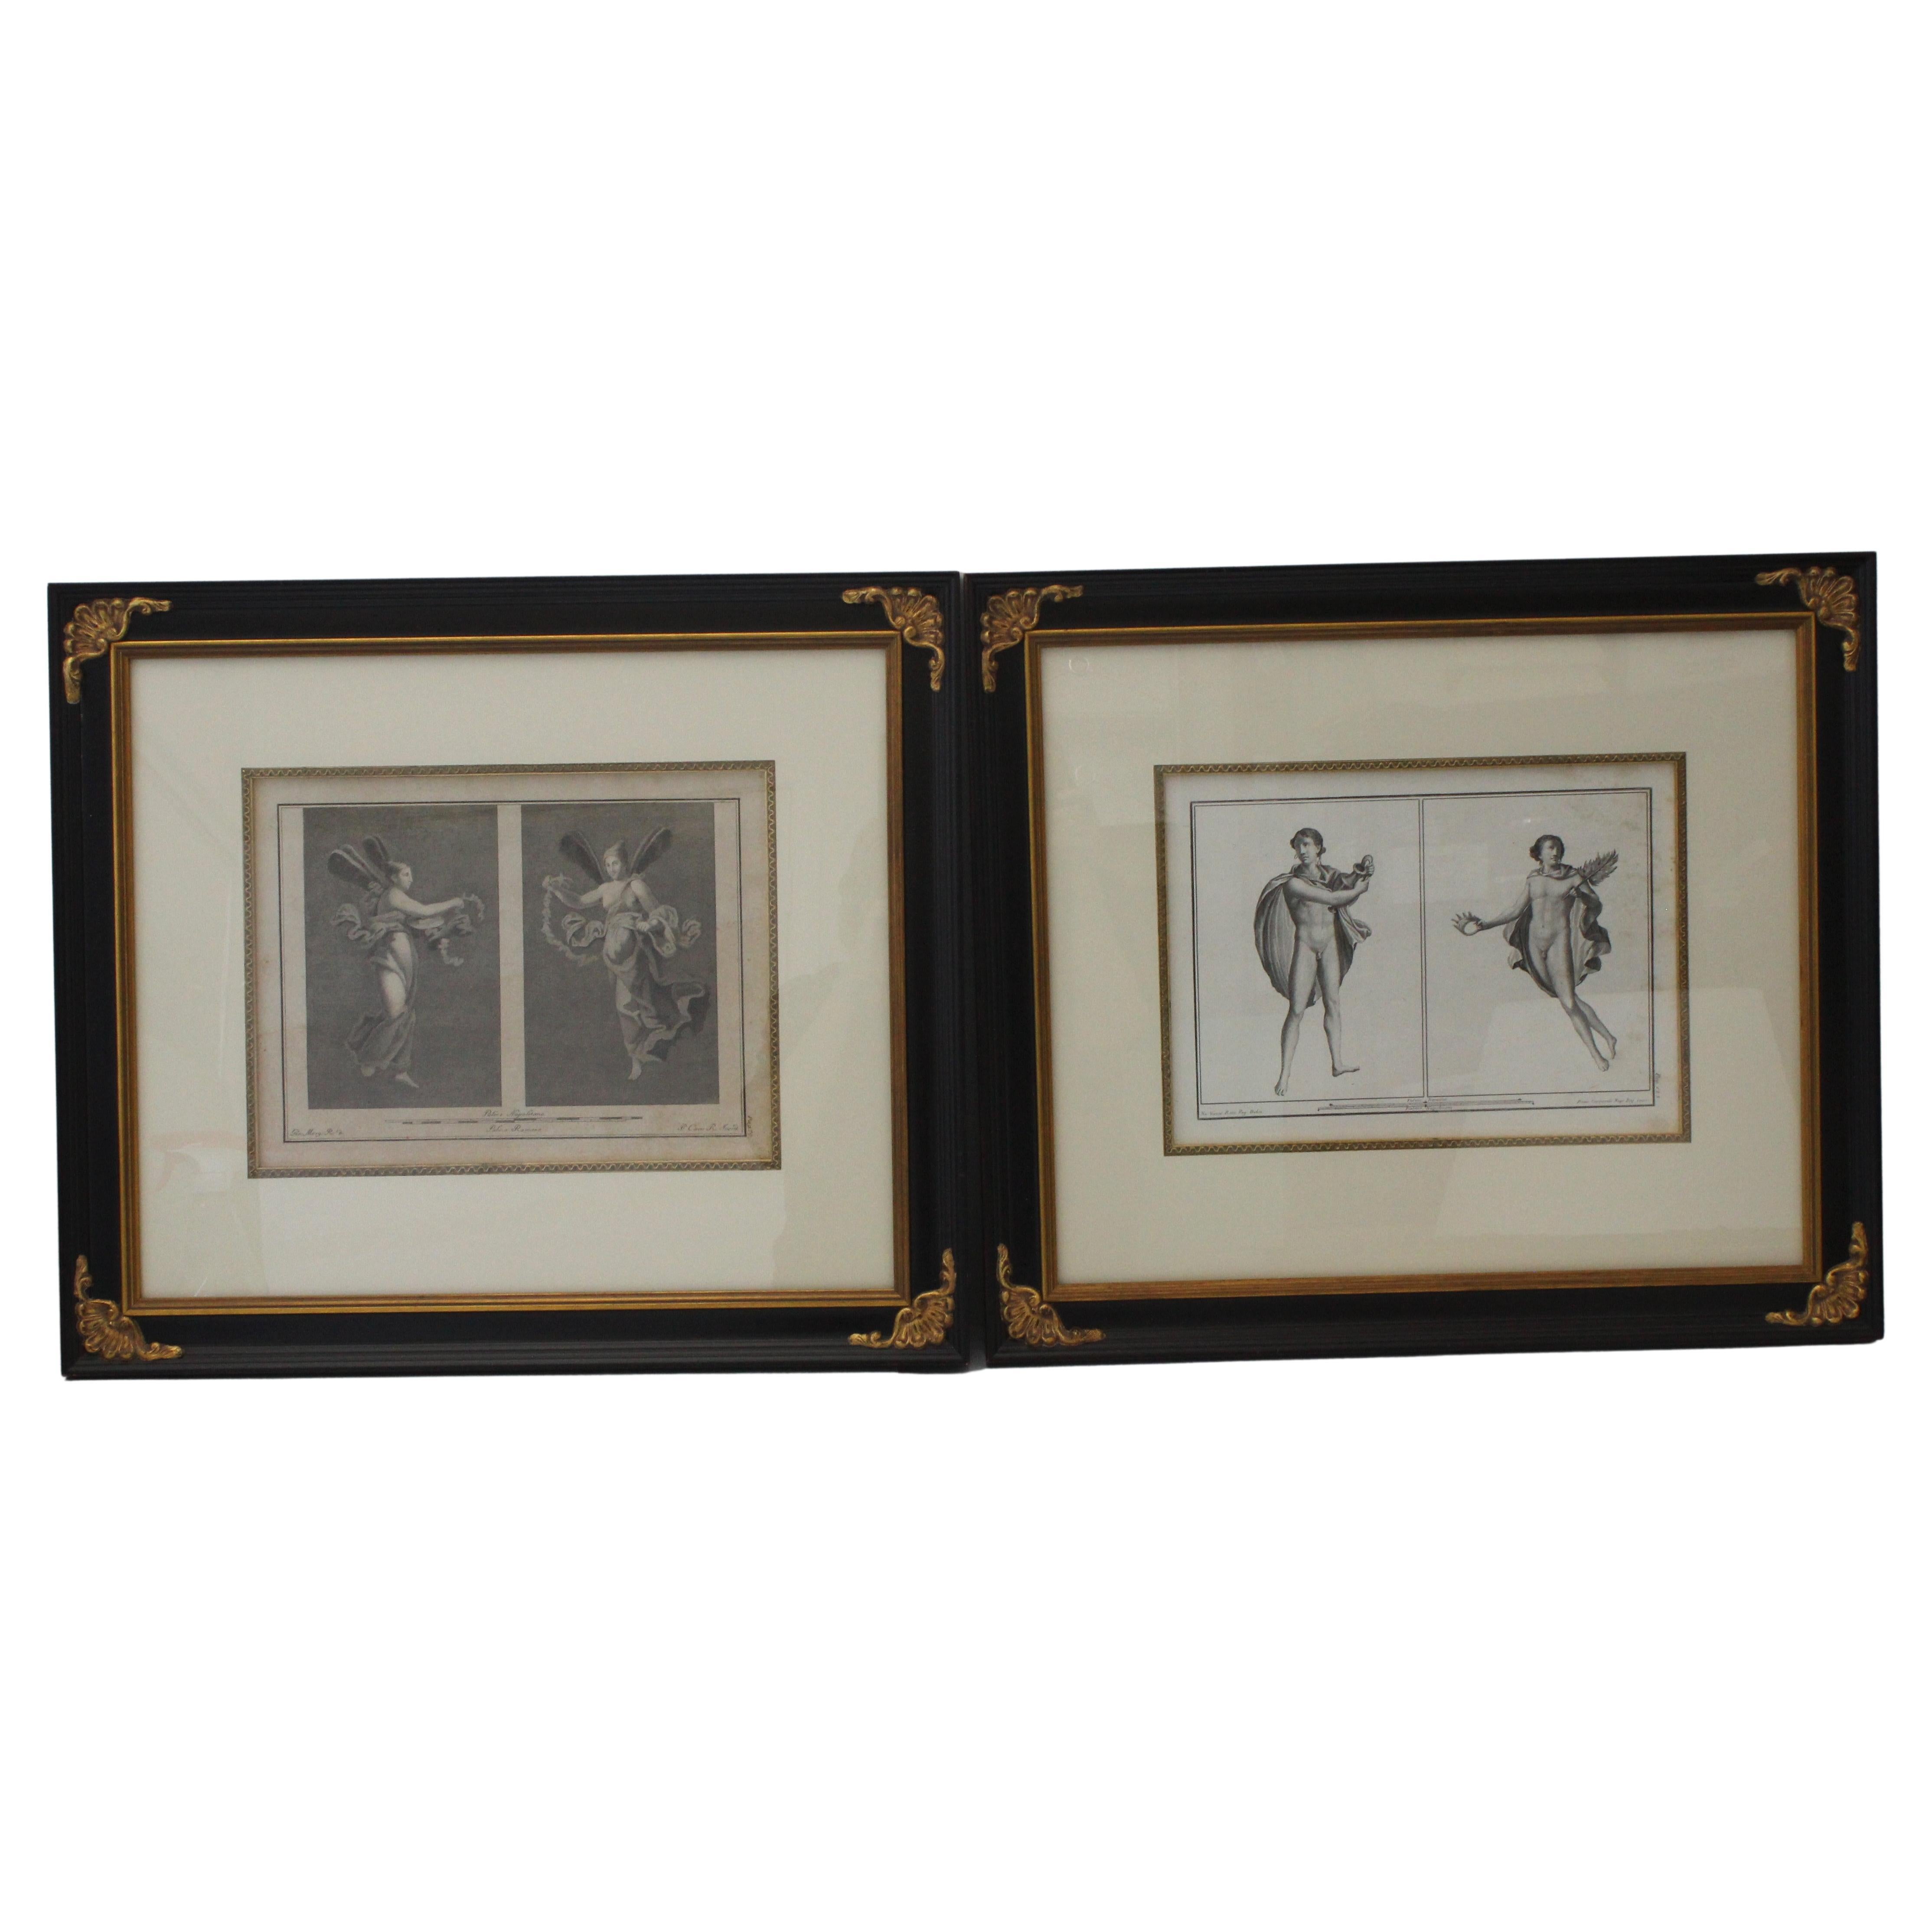 Thsi stylish and chic set of two framed engraving date to the 18th century and were created by Francesco Cepparoli and Giovani Morghen. 

Note: Overall dimensions are 21 5/8